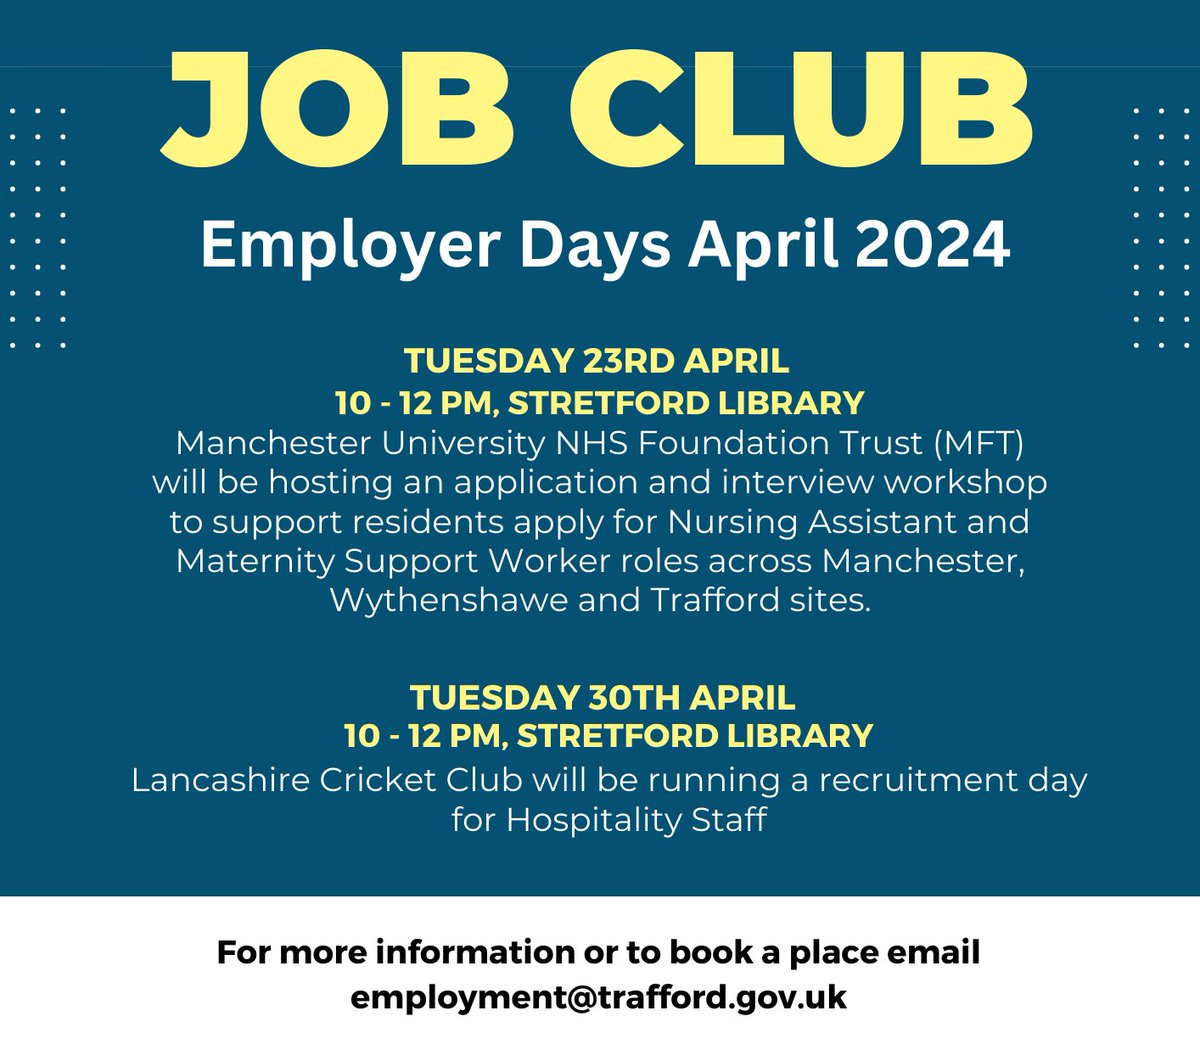 Could your next role be with the NHS or Lancashire Cricket Club? Join these two local employers recruiting at Job Club @ Stretford Library. 👉 @MFTnhs 📅 Tues 23 April 🕙 10am to 12 noon 👉 @lancscricket 📅 Tues 30 April 🕙 10am to 12 noon More info: ow.ly/6IHq50ReTz9